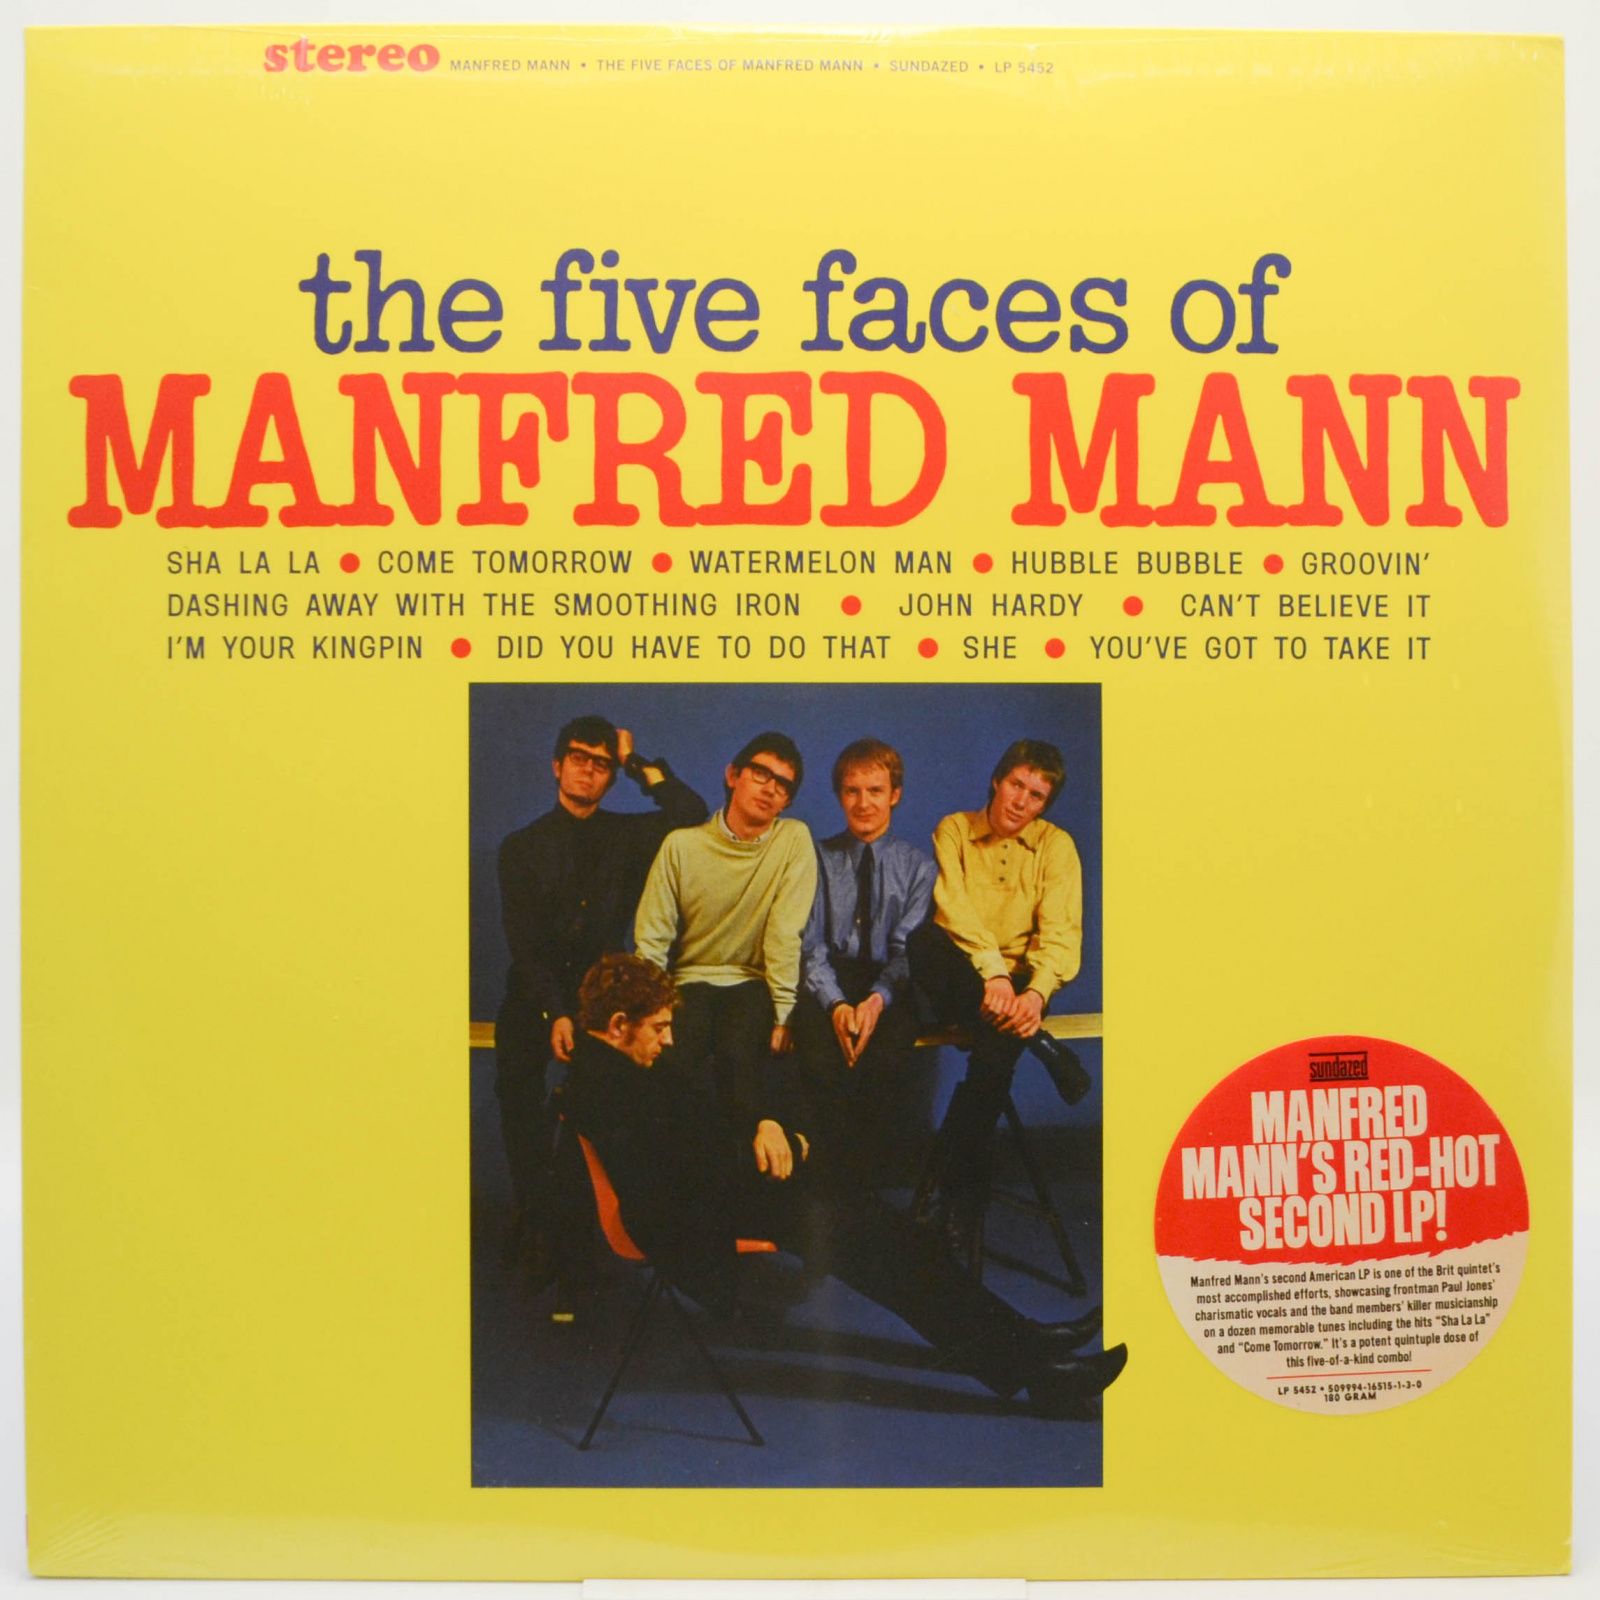 Manfred Mann — The Five Faces Of Manfred Mann (US), 1965